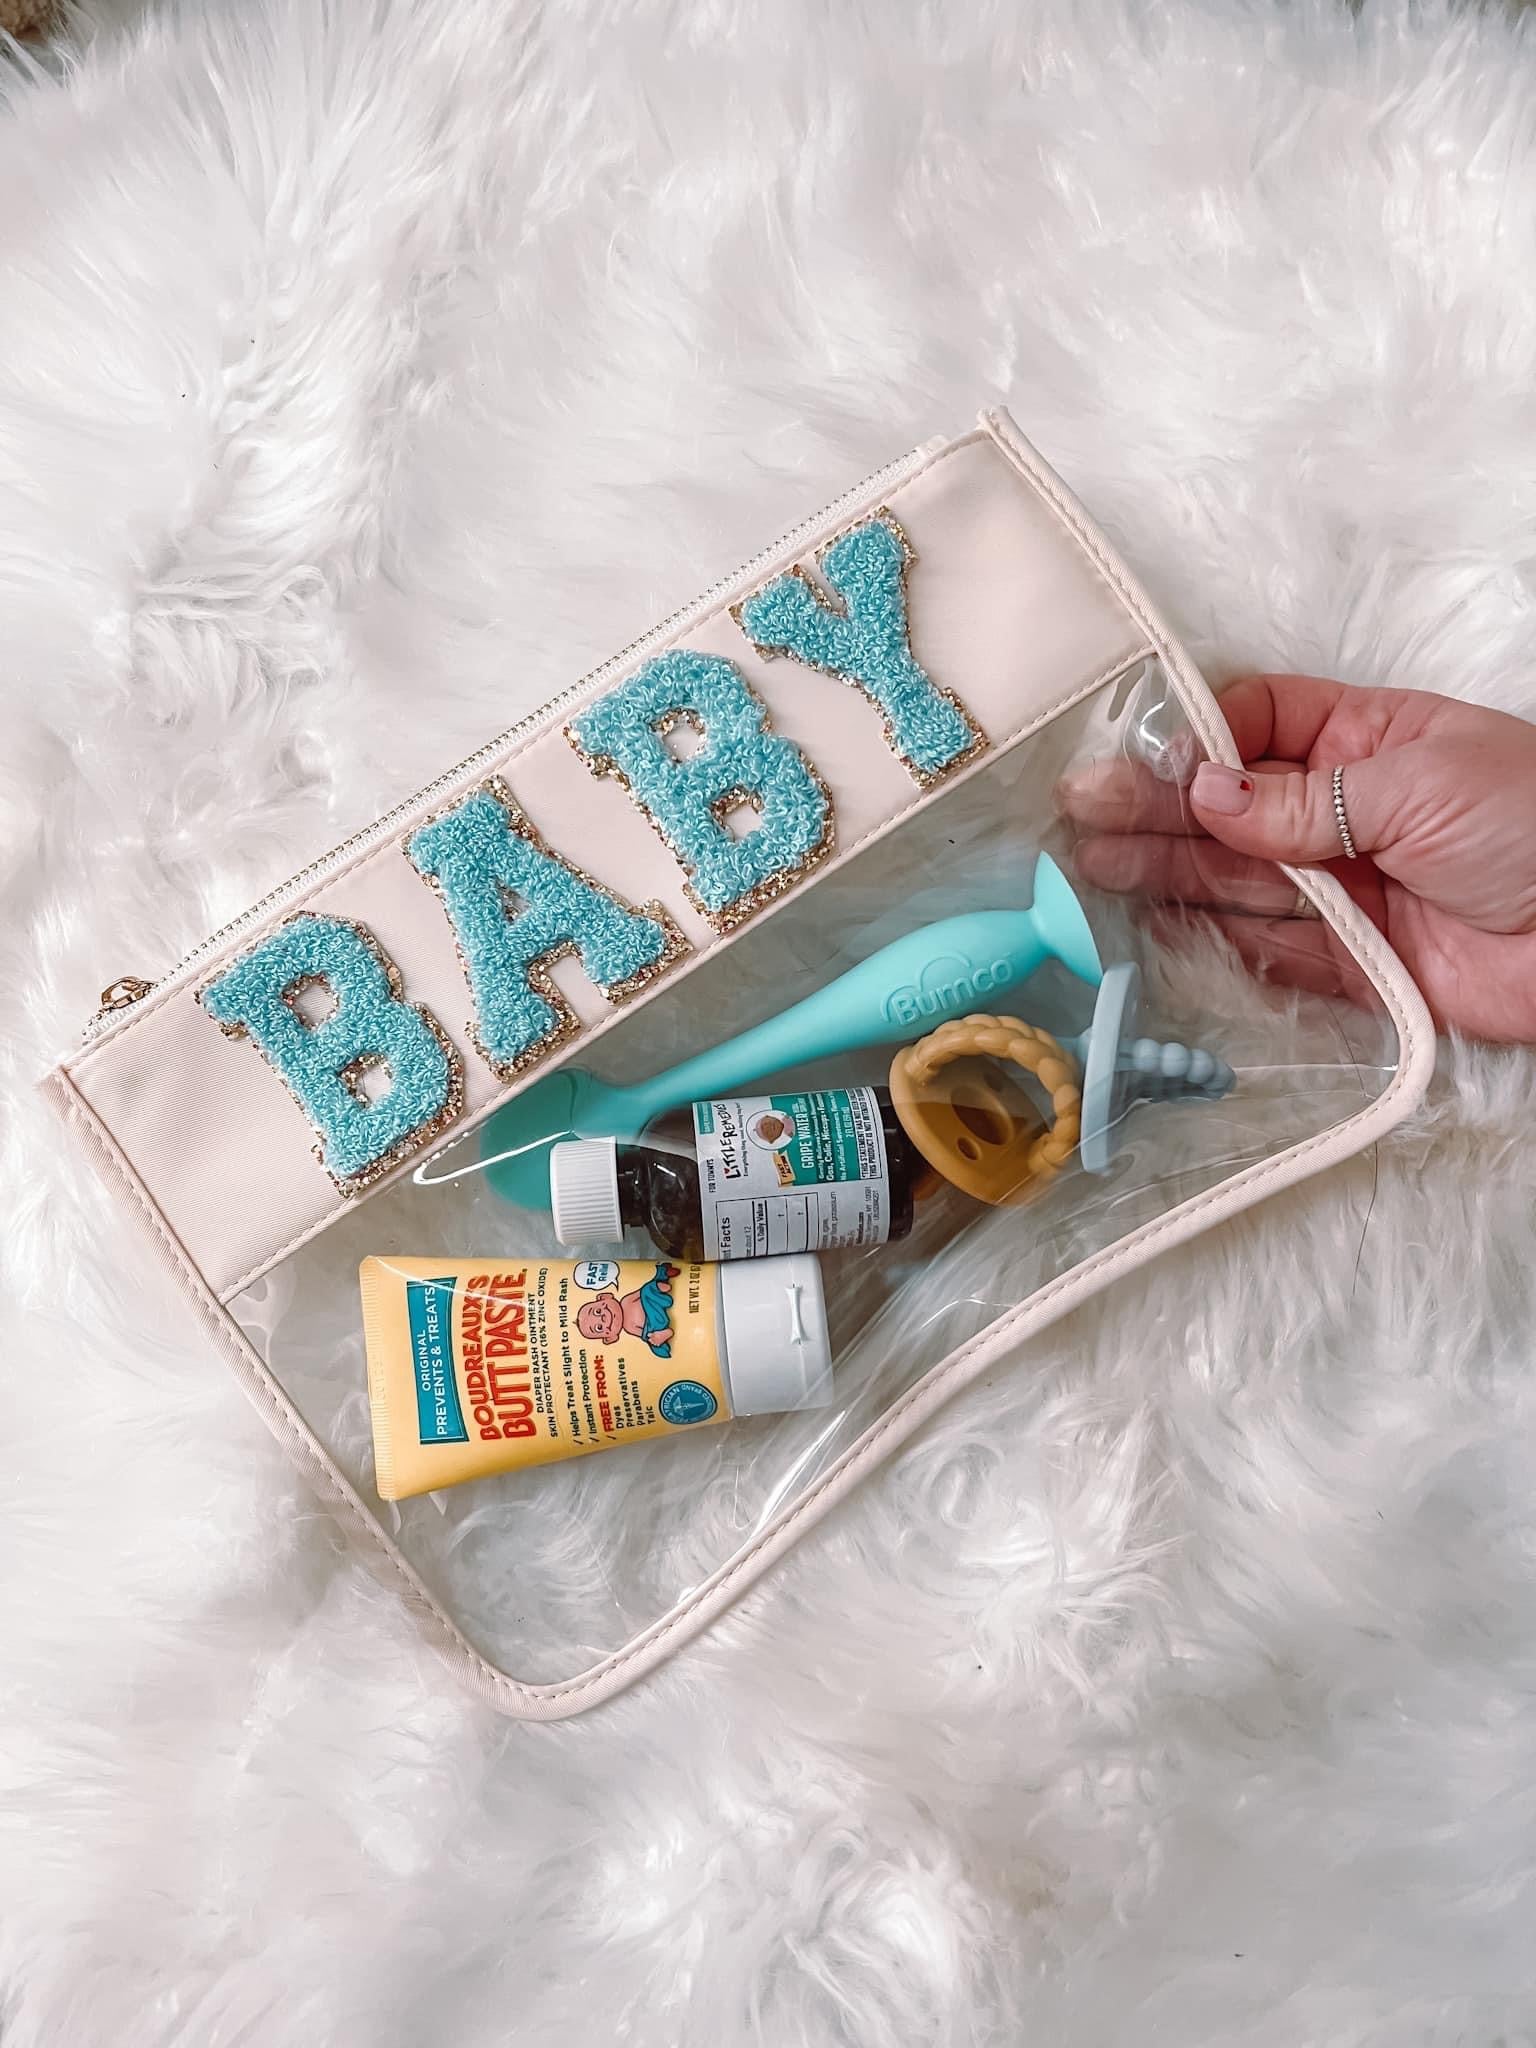 Clear Blue “BABY” Pouch with Chenille Letters!